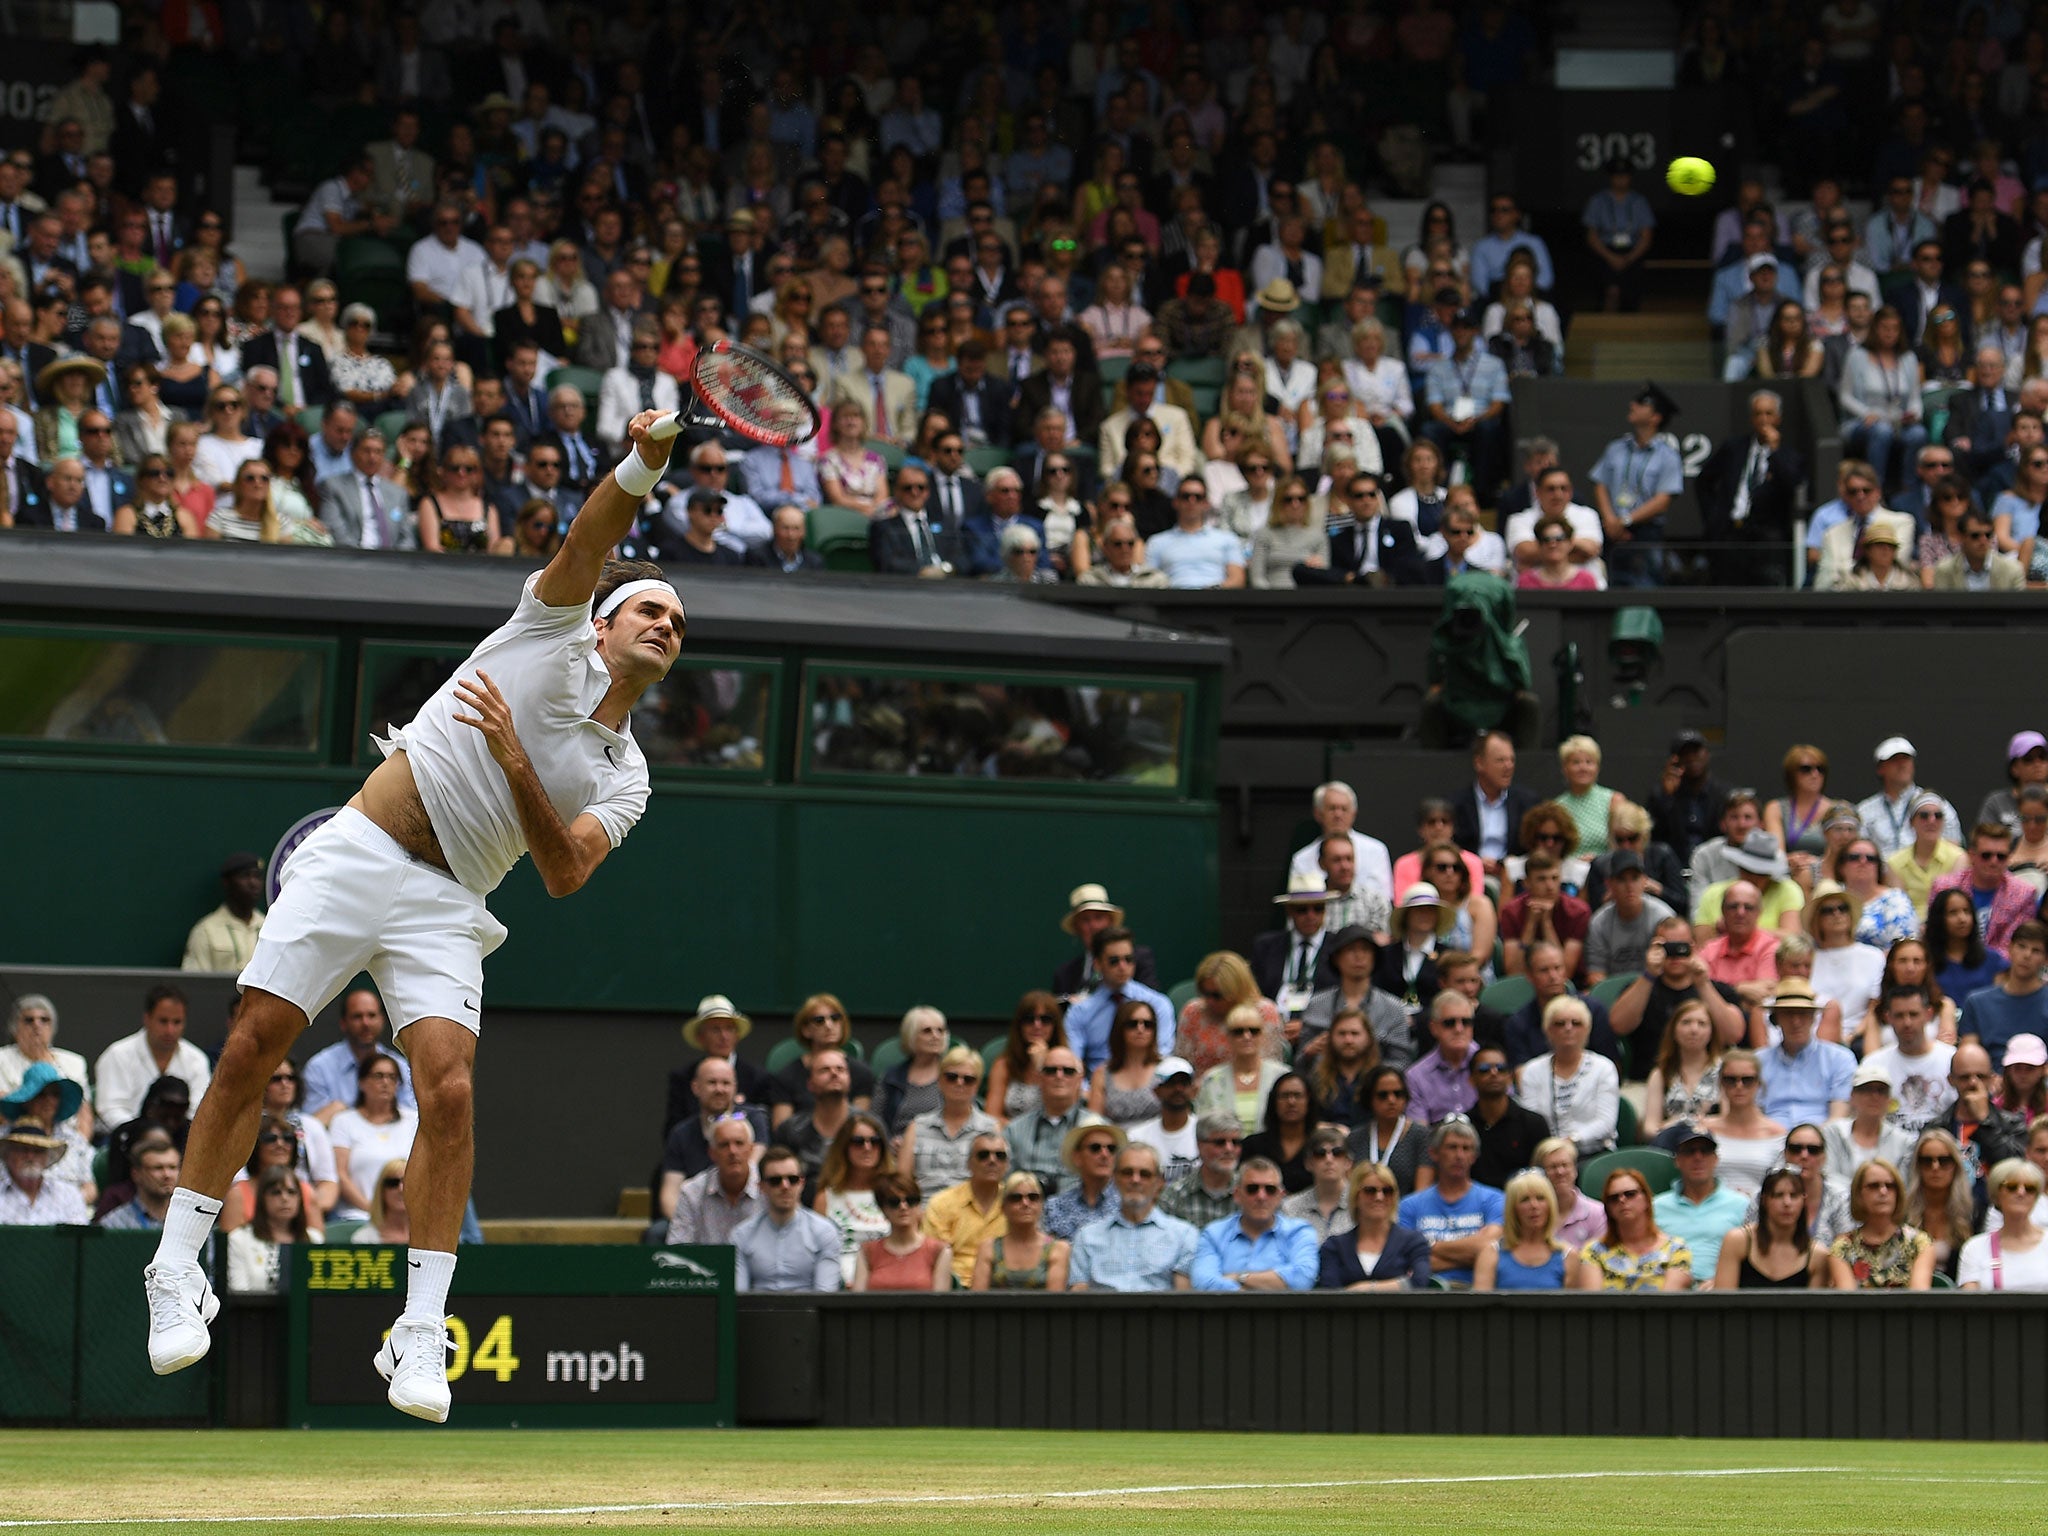 Roger Federer serves on his way to victory